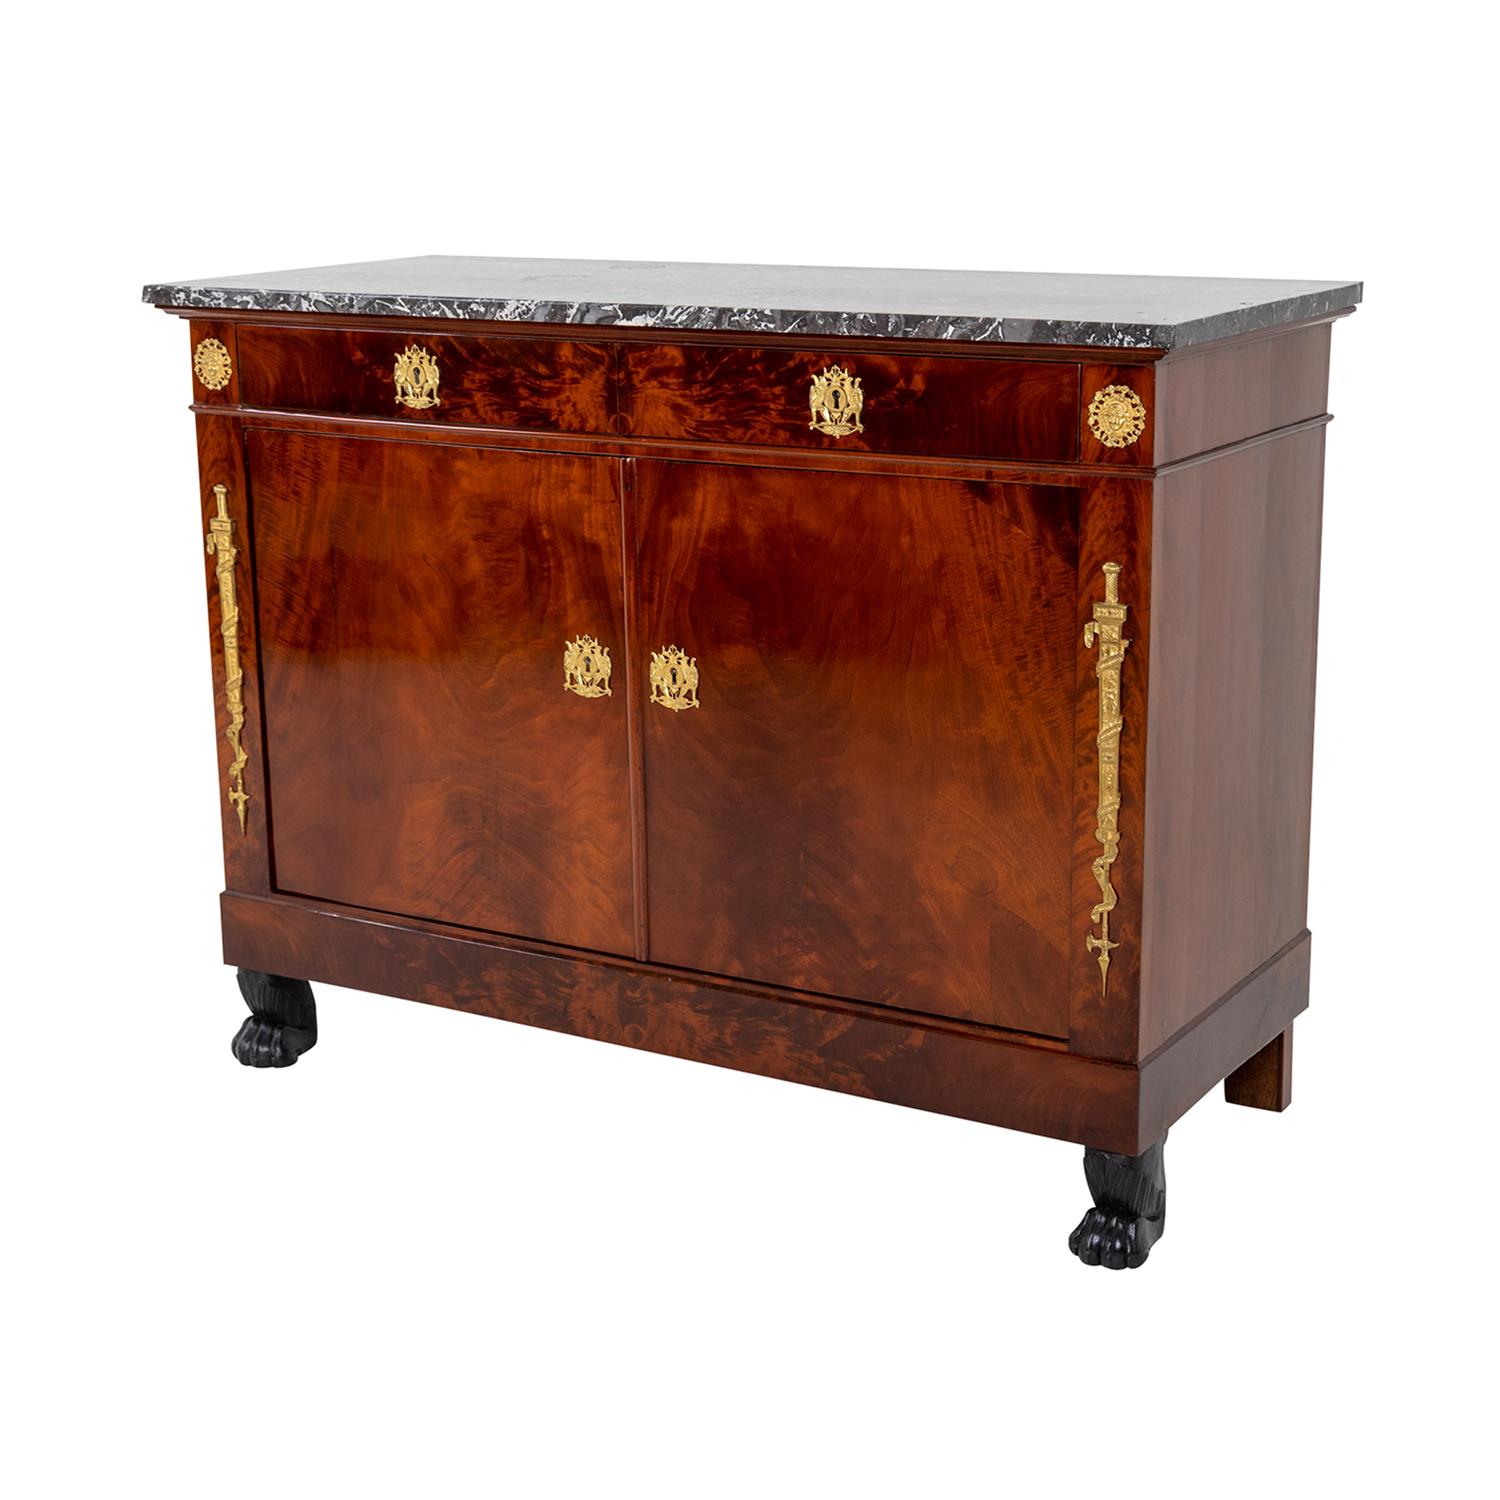 A dark-brown, antique French single chest of drawers made of hand crafted shellac polished Mahogany, veneered on Oakwood in good condition. The rectangular cupboard is composed with a grey-white marble top, the inside is consisting one shelf,